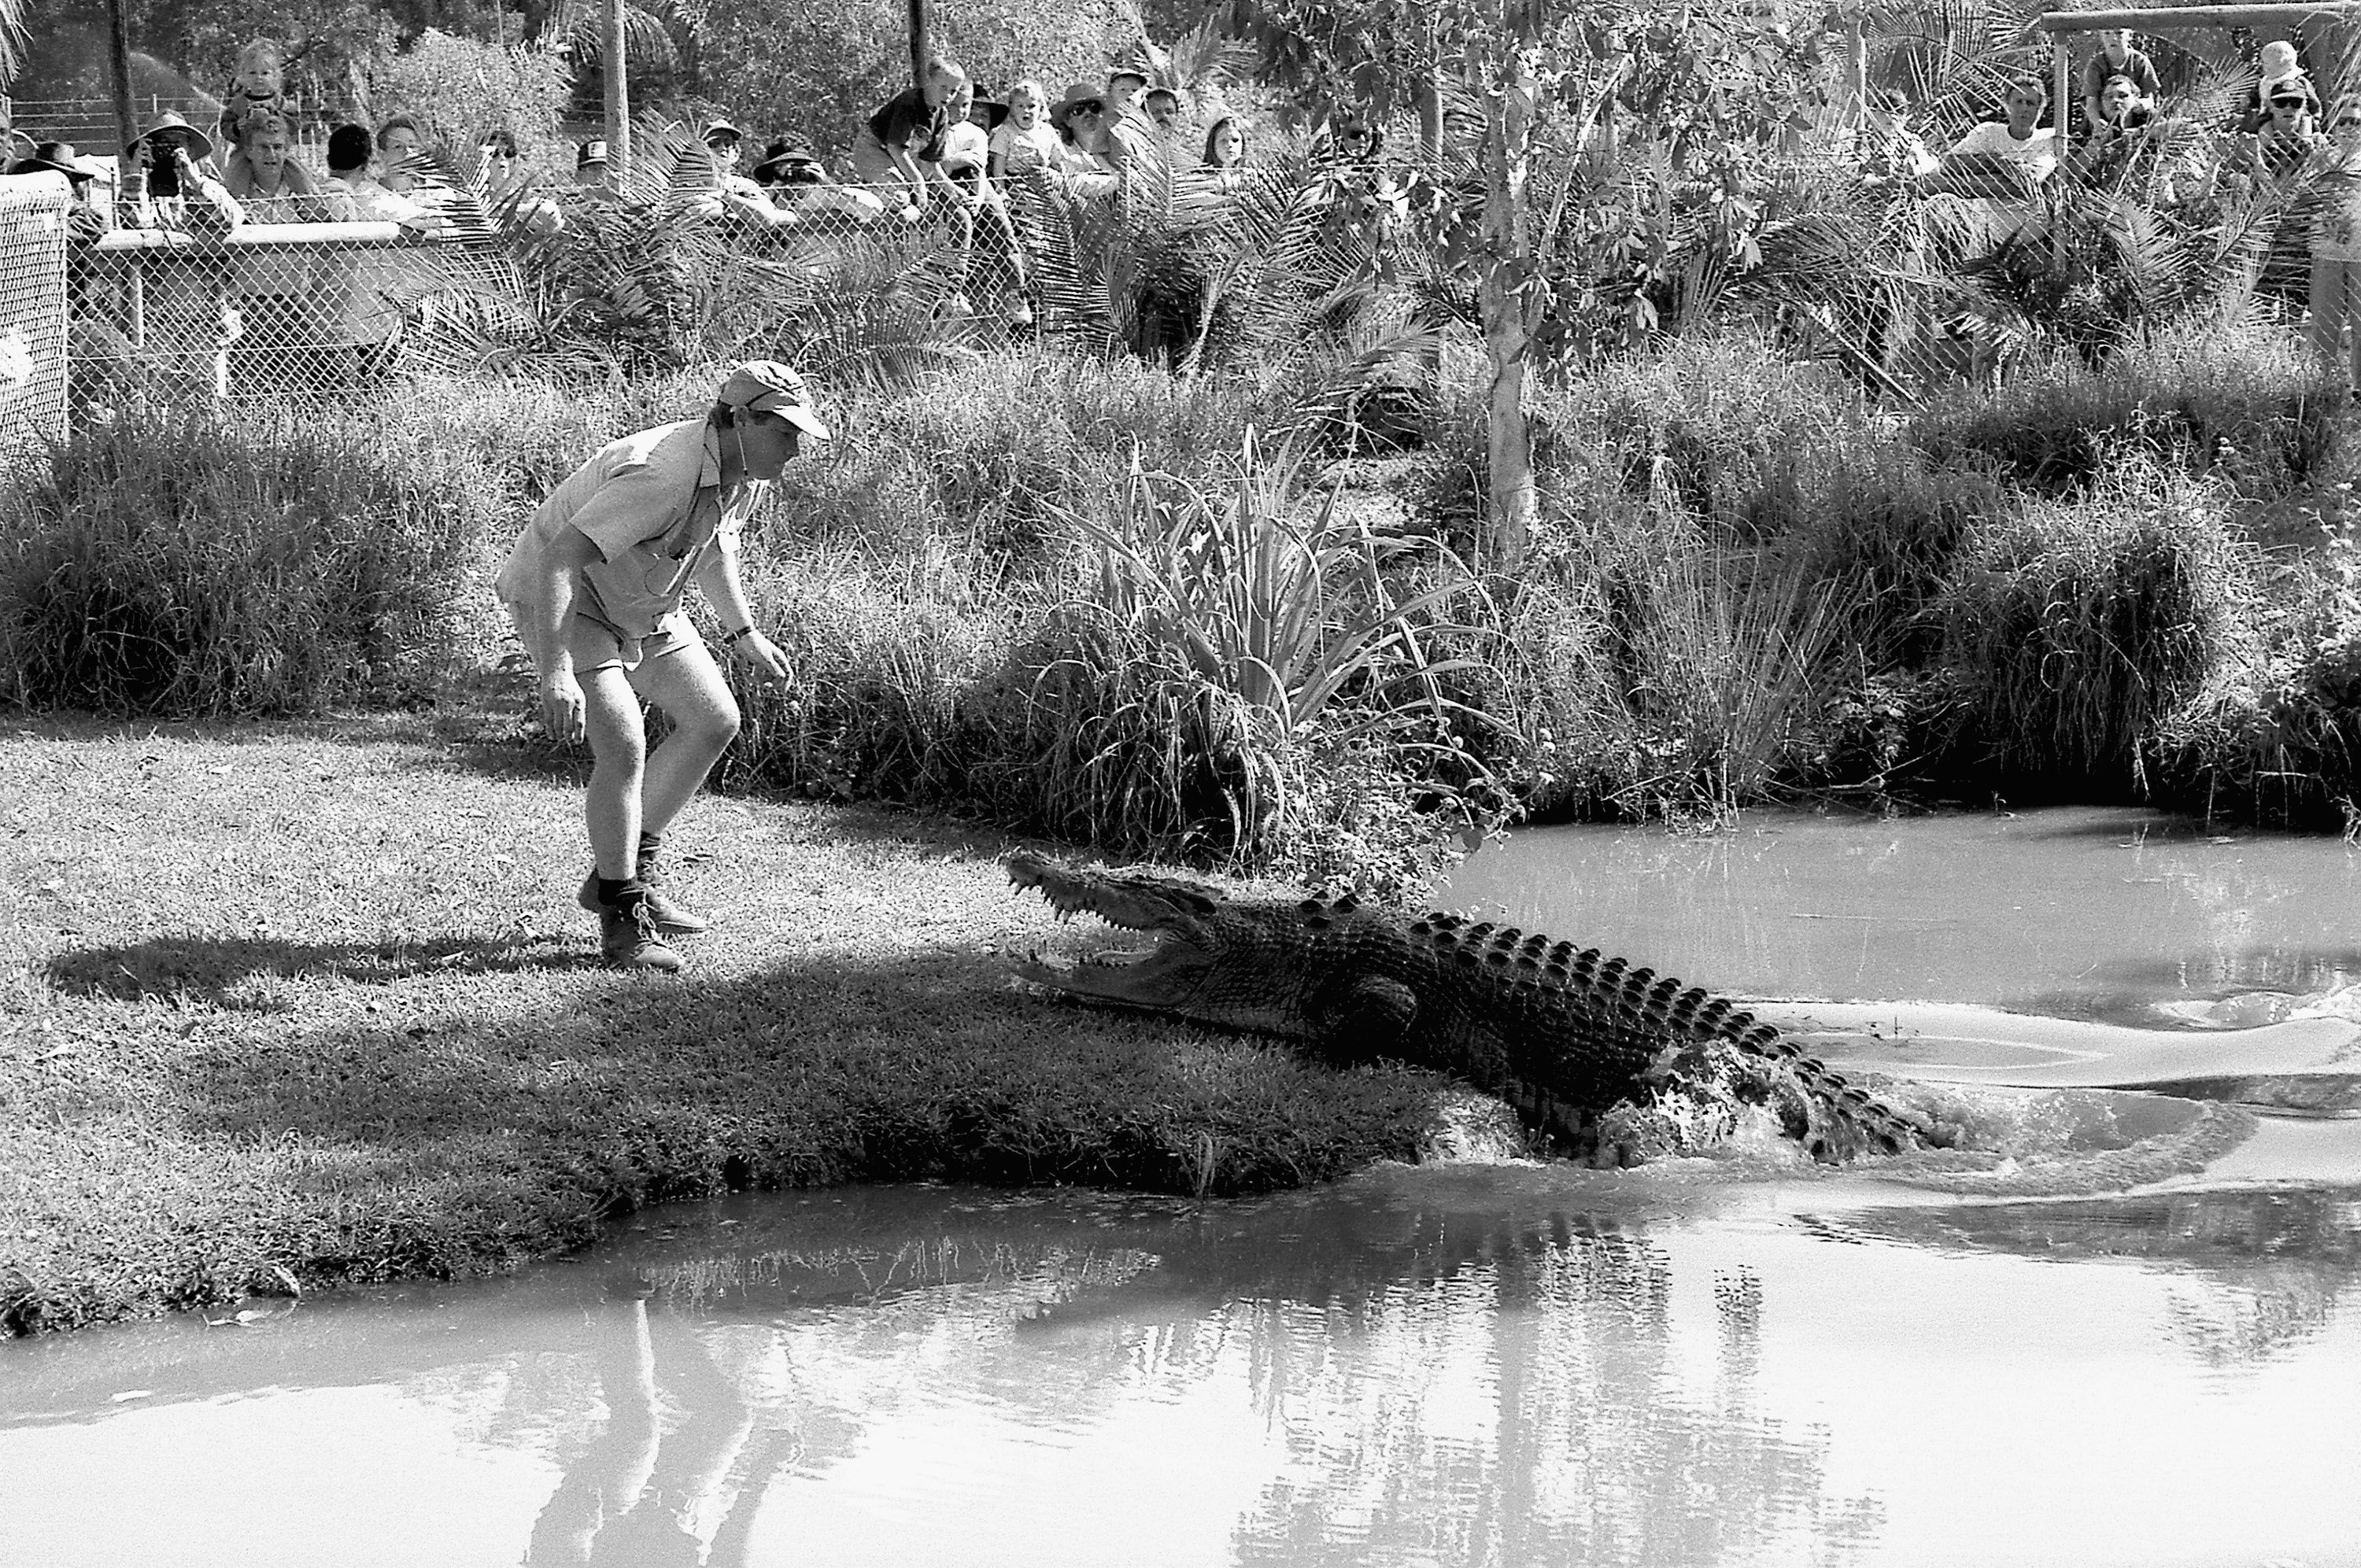 A 1996 file photo shows Steve Irwin, known as the Crocodile Hunter, at his Australia Zoo in 1996 in Beerwah, on the Sunshine Coast, Australia.. Photos: Getty Images